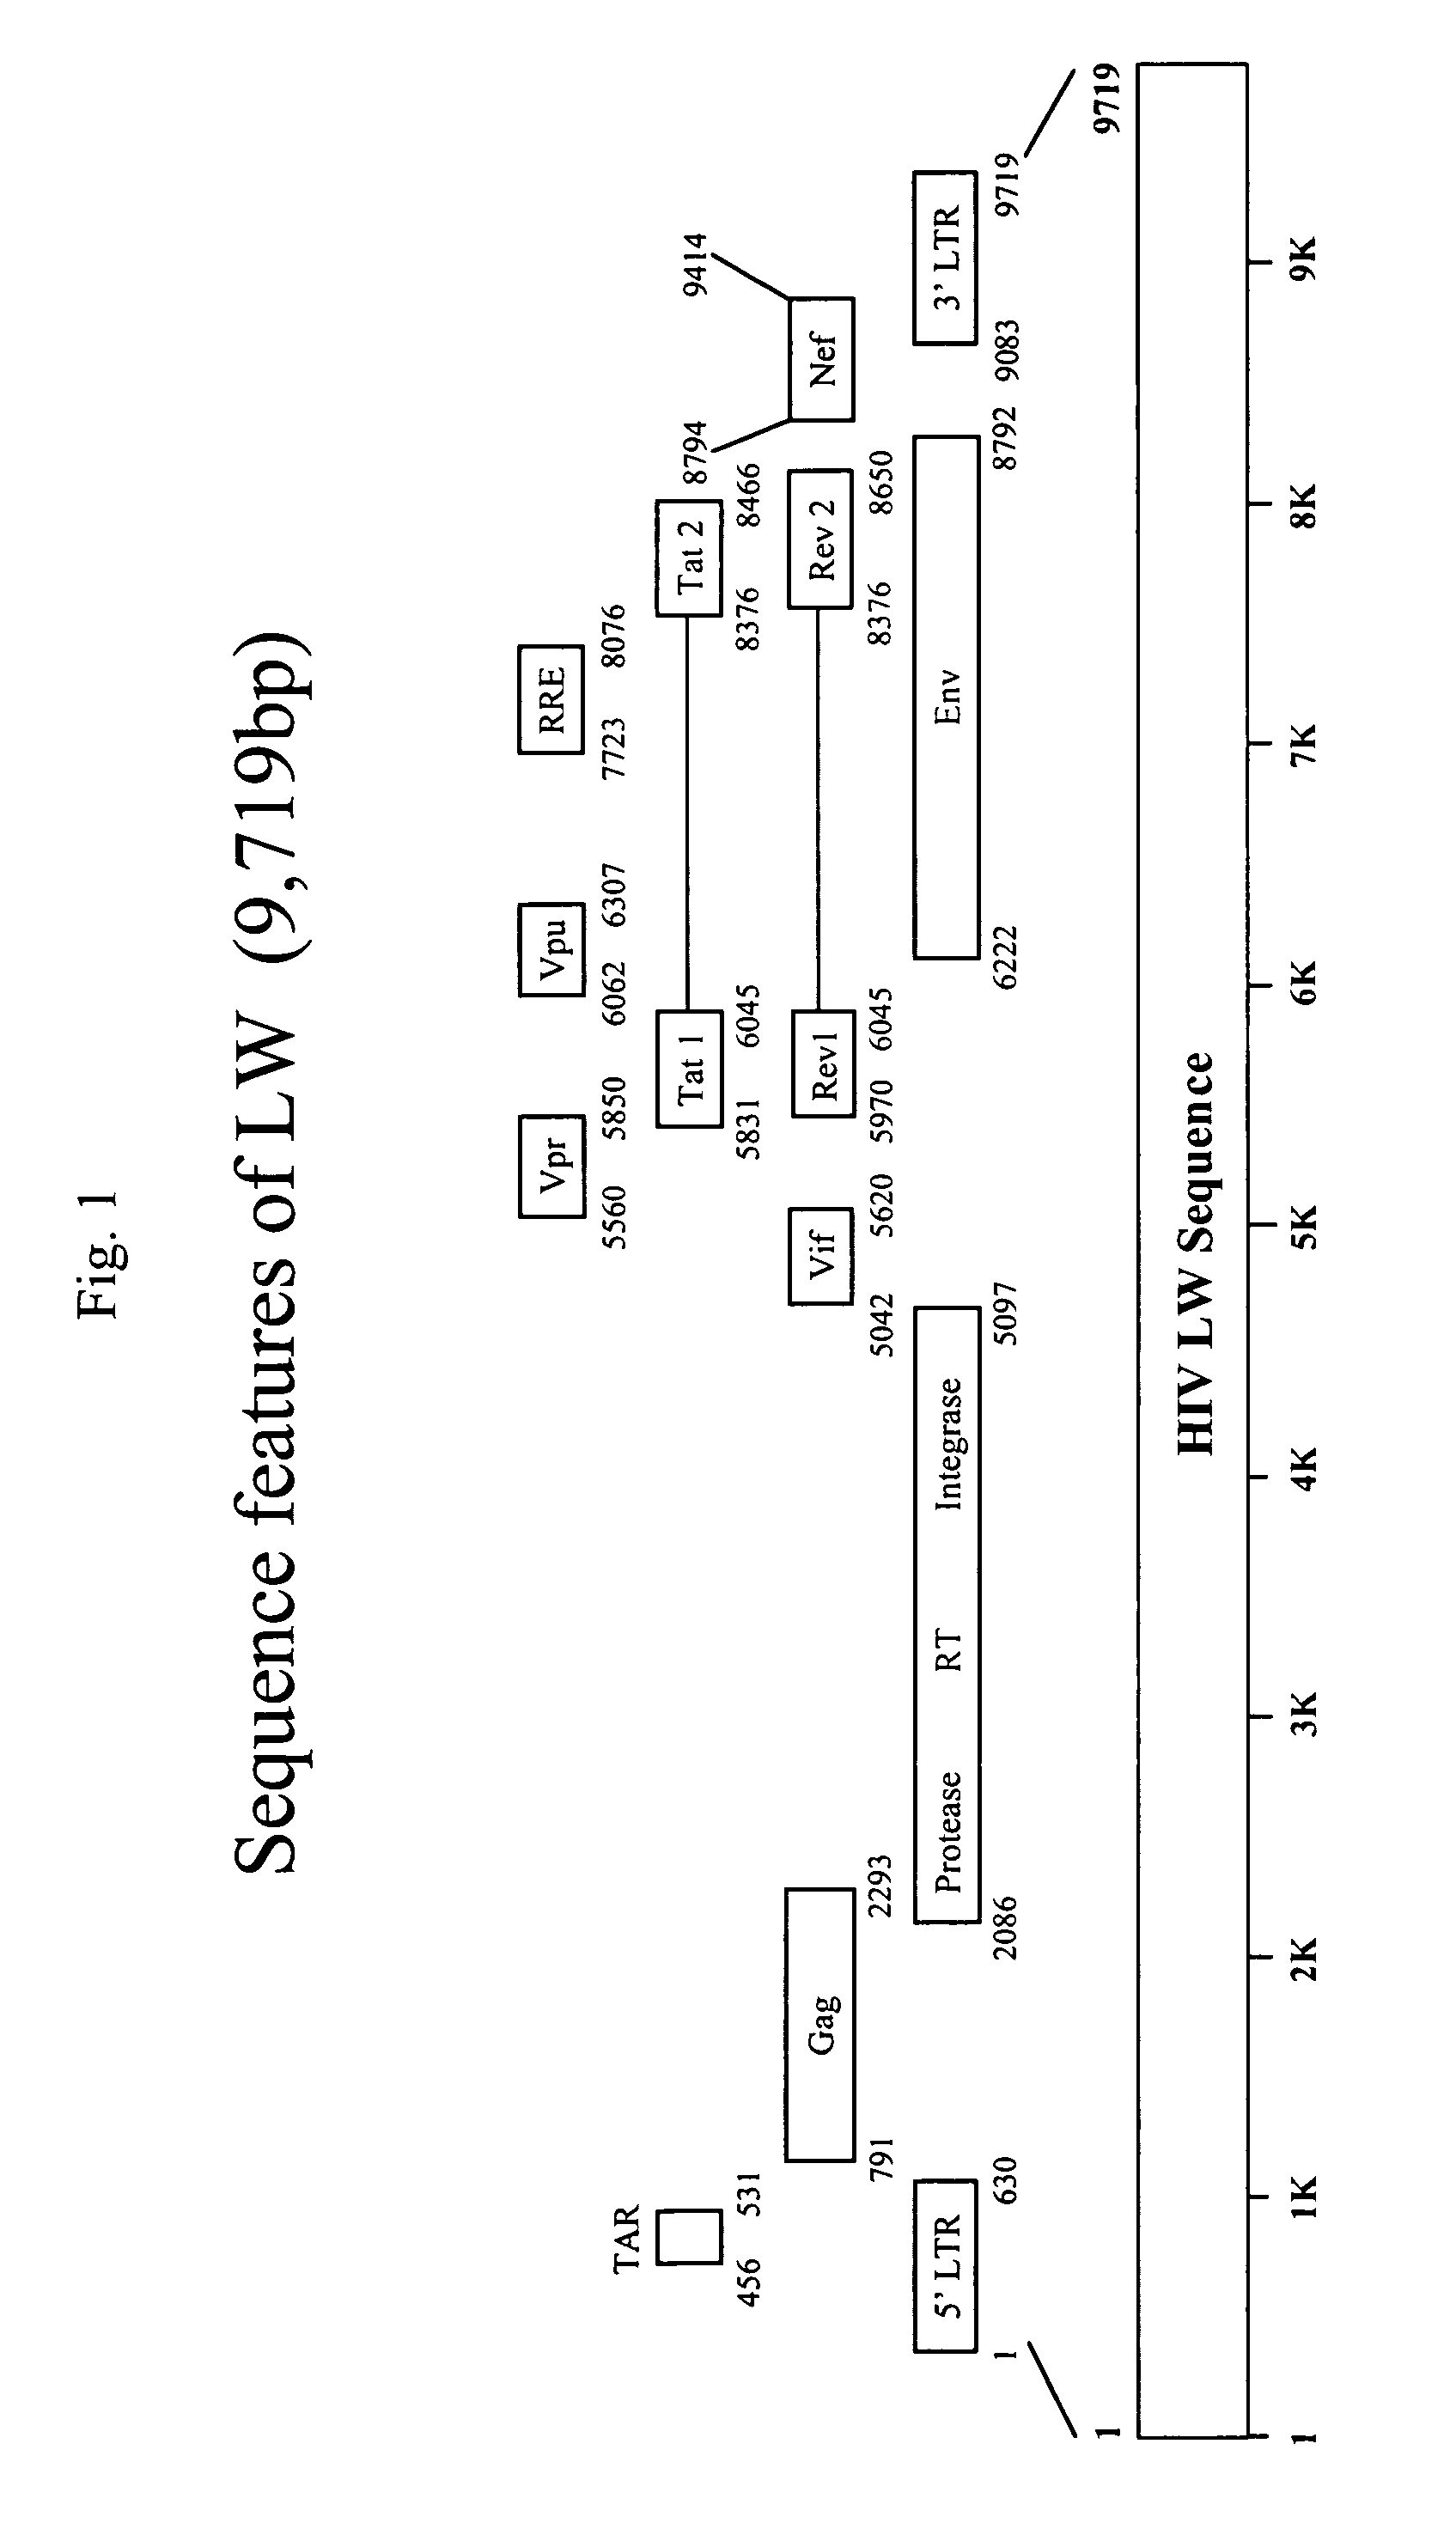 DNA composition and uses thereof